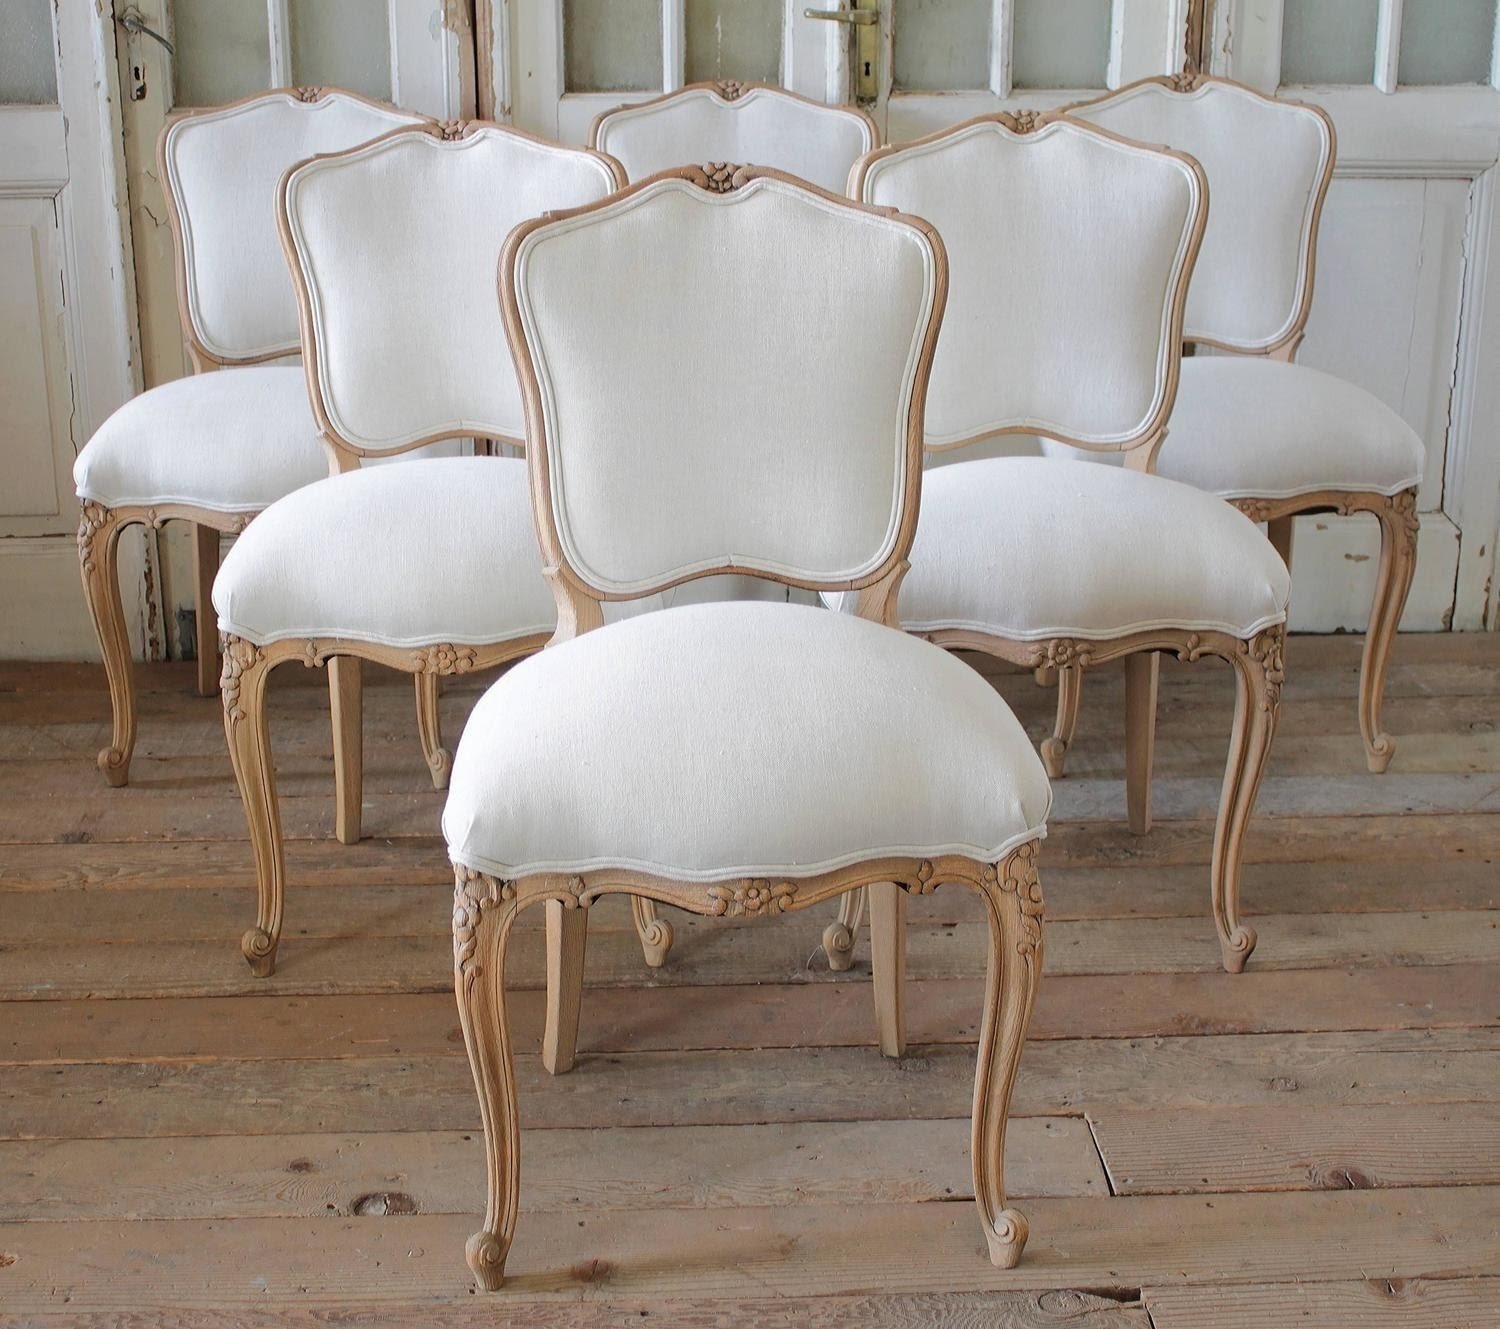 French Country Dining Room Chairs : French Country Dining Chairs Birch